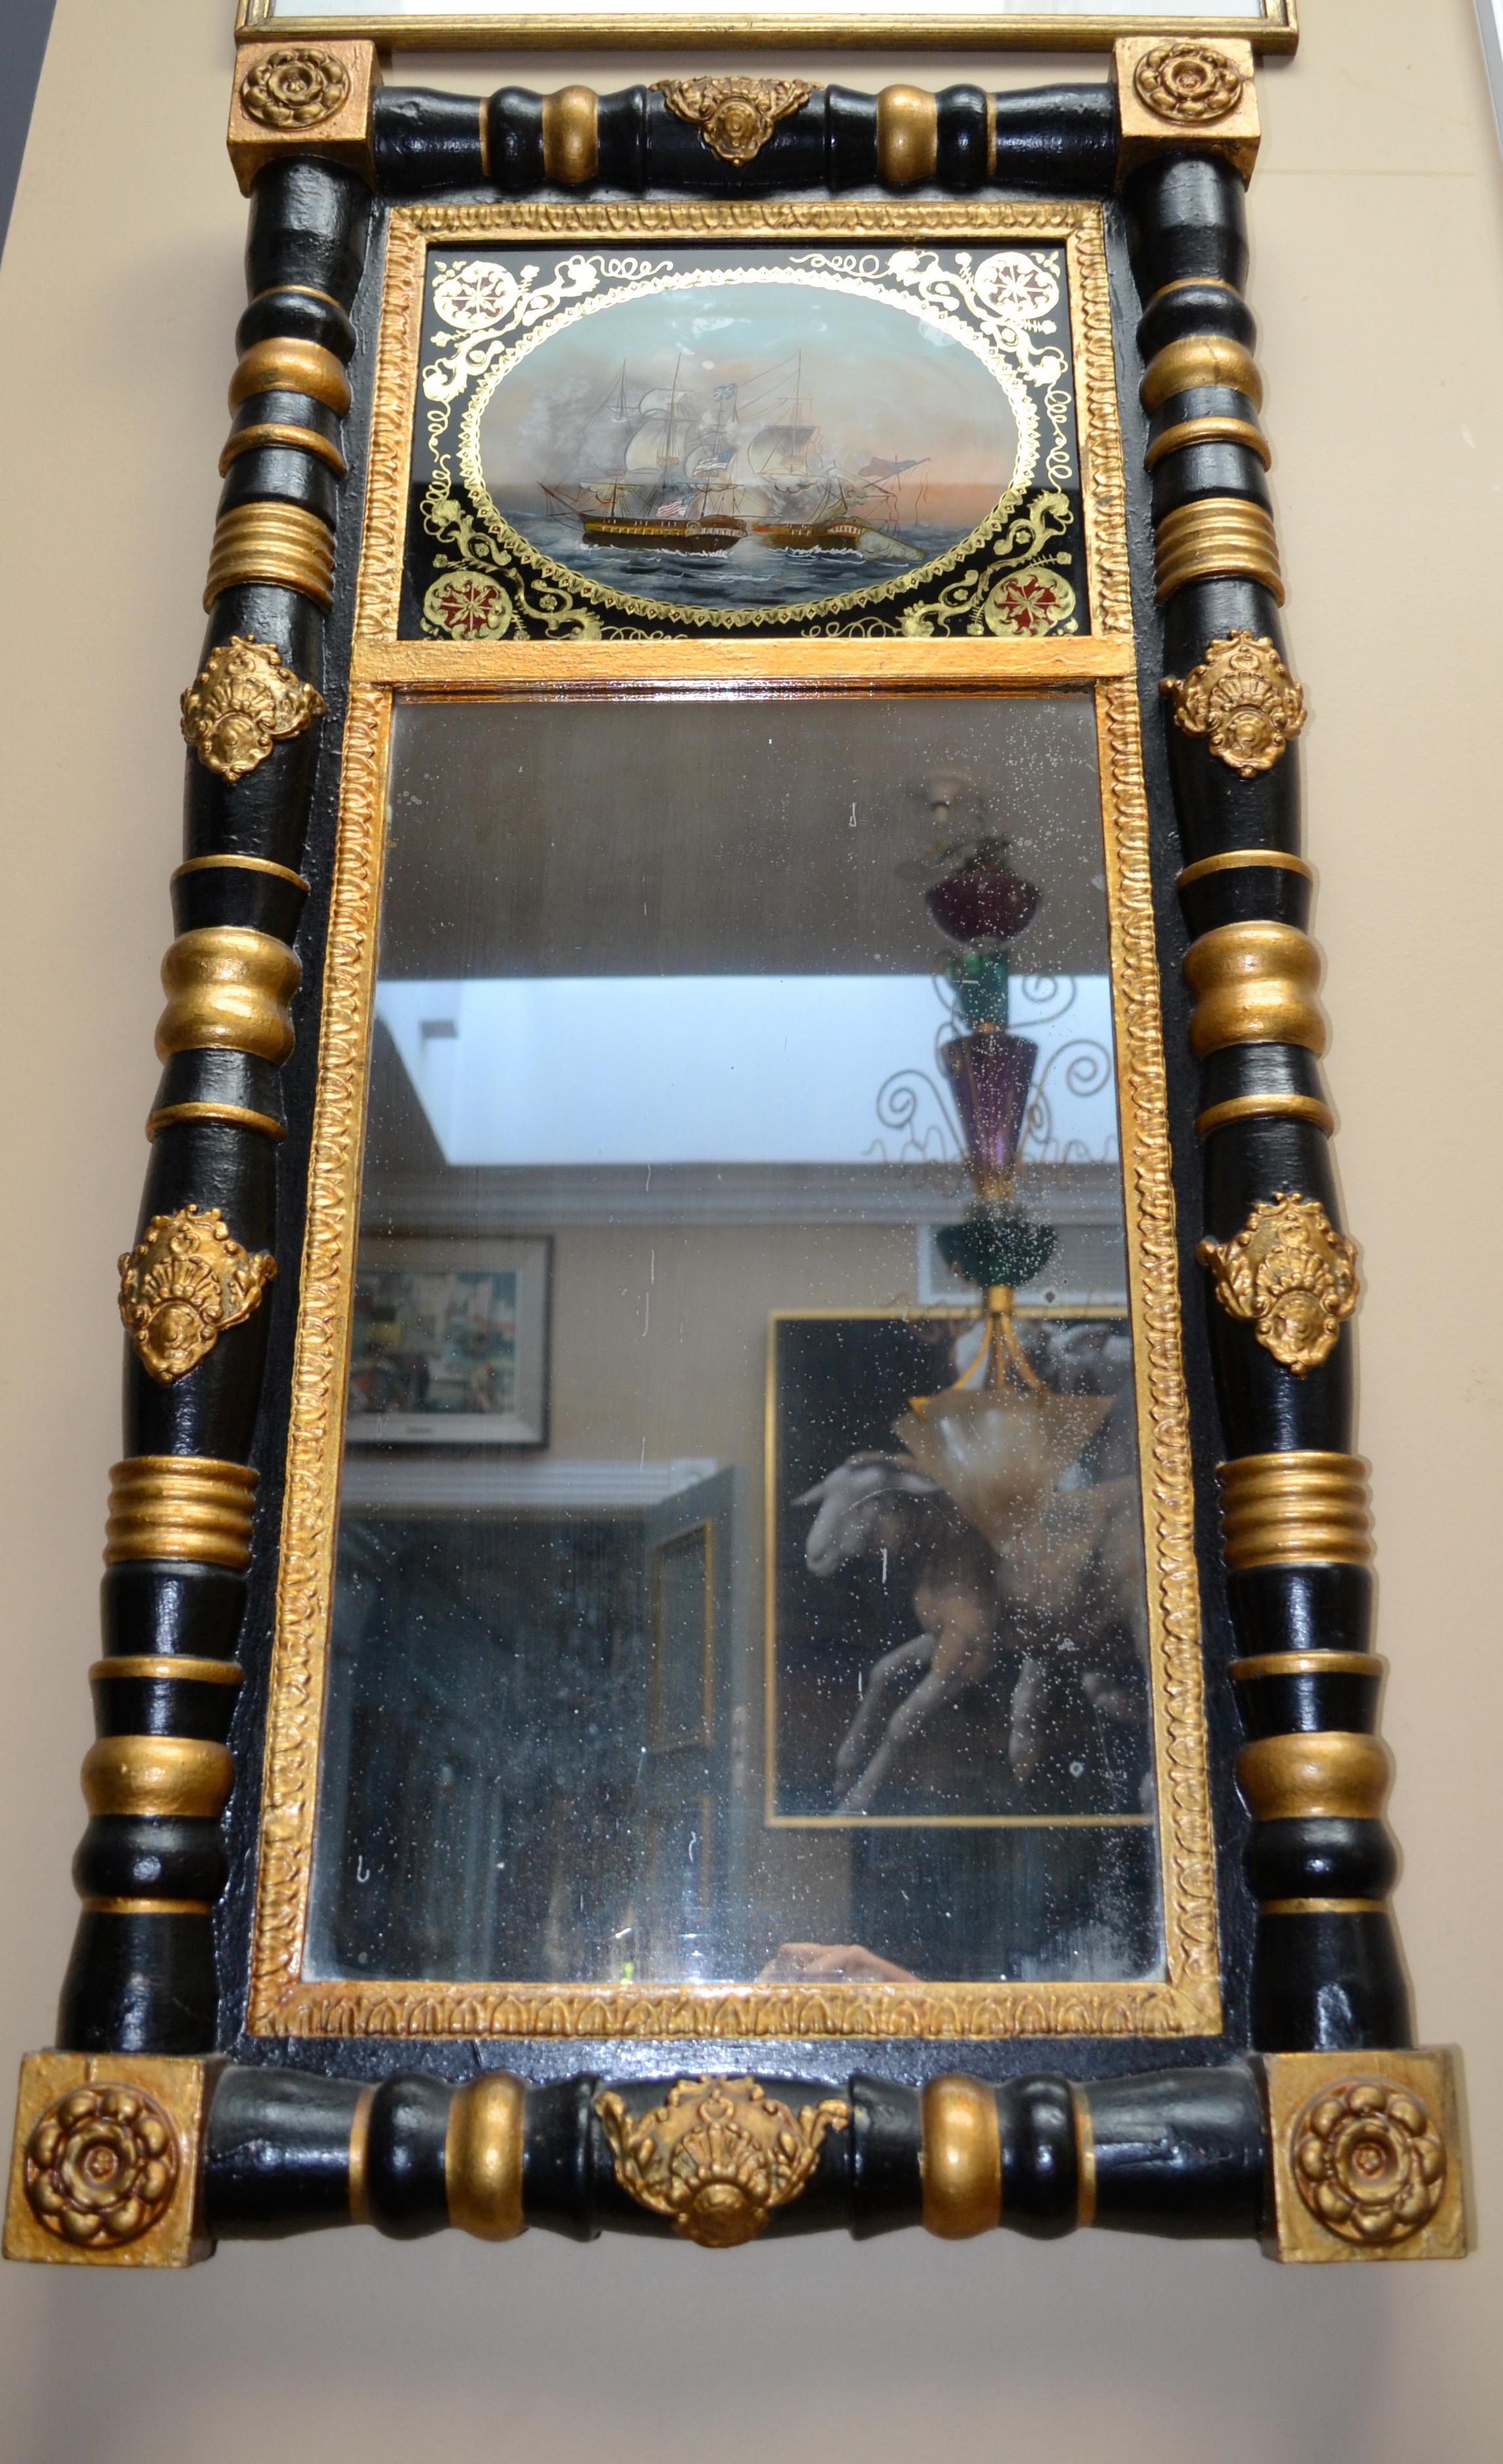 An American Federal Period mirror with an églomisé naval battle scene. The rectangular ebonized wood framed mirror is in two sections bordered with half turned columns decorated with gilding, the lower section is glazed, the top section shows an